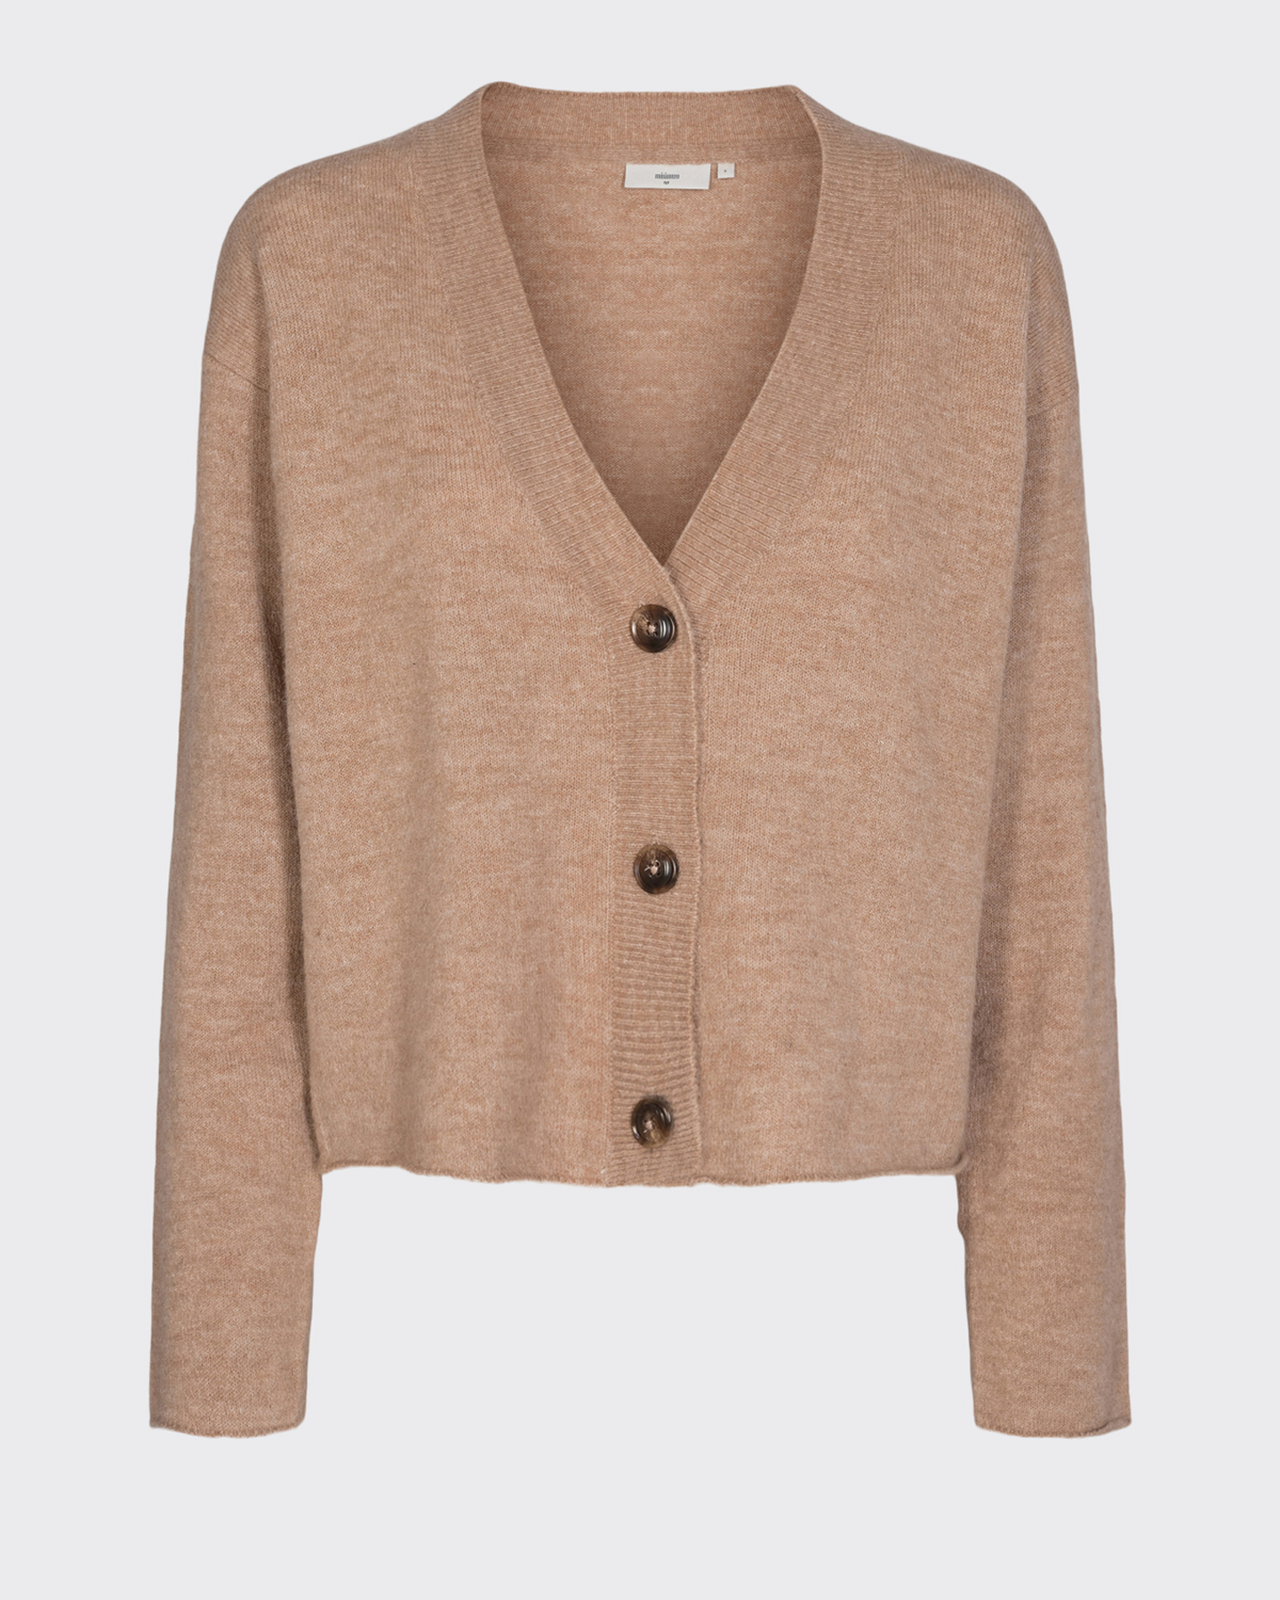 Women's Moffie Cardigan in Nomad on white background